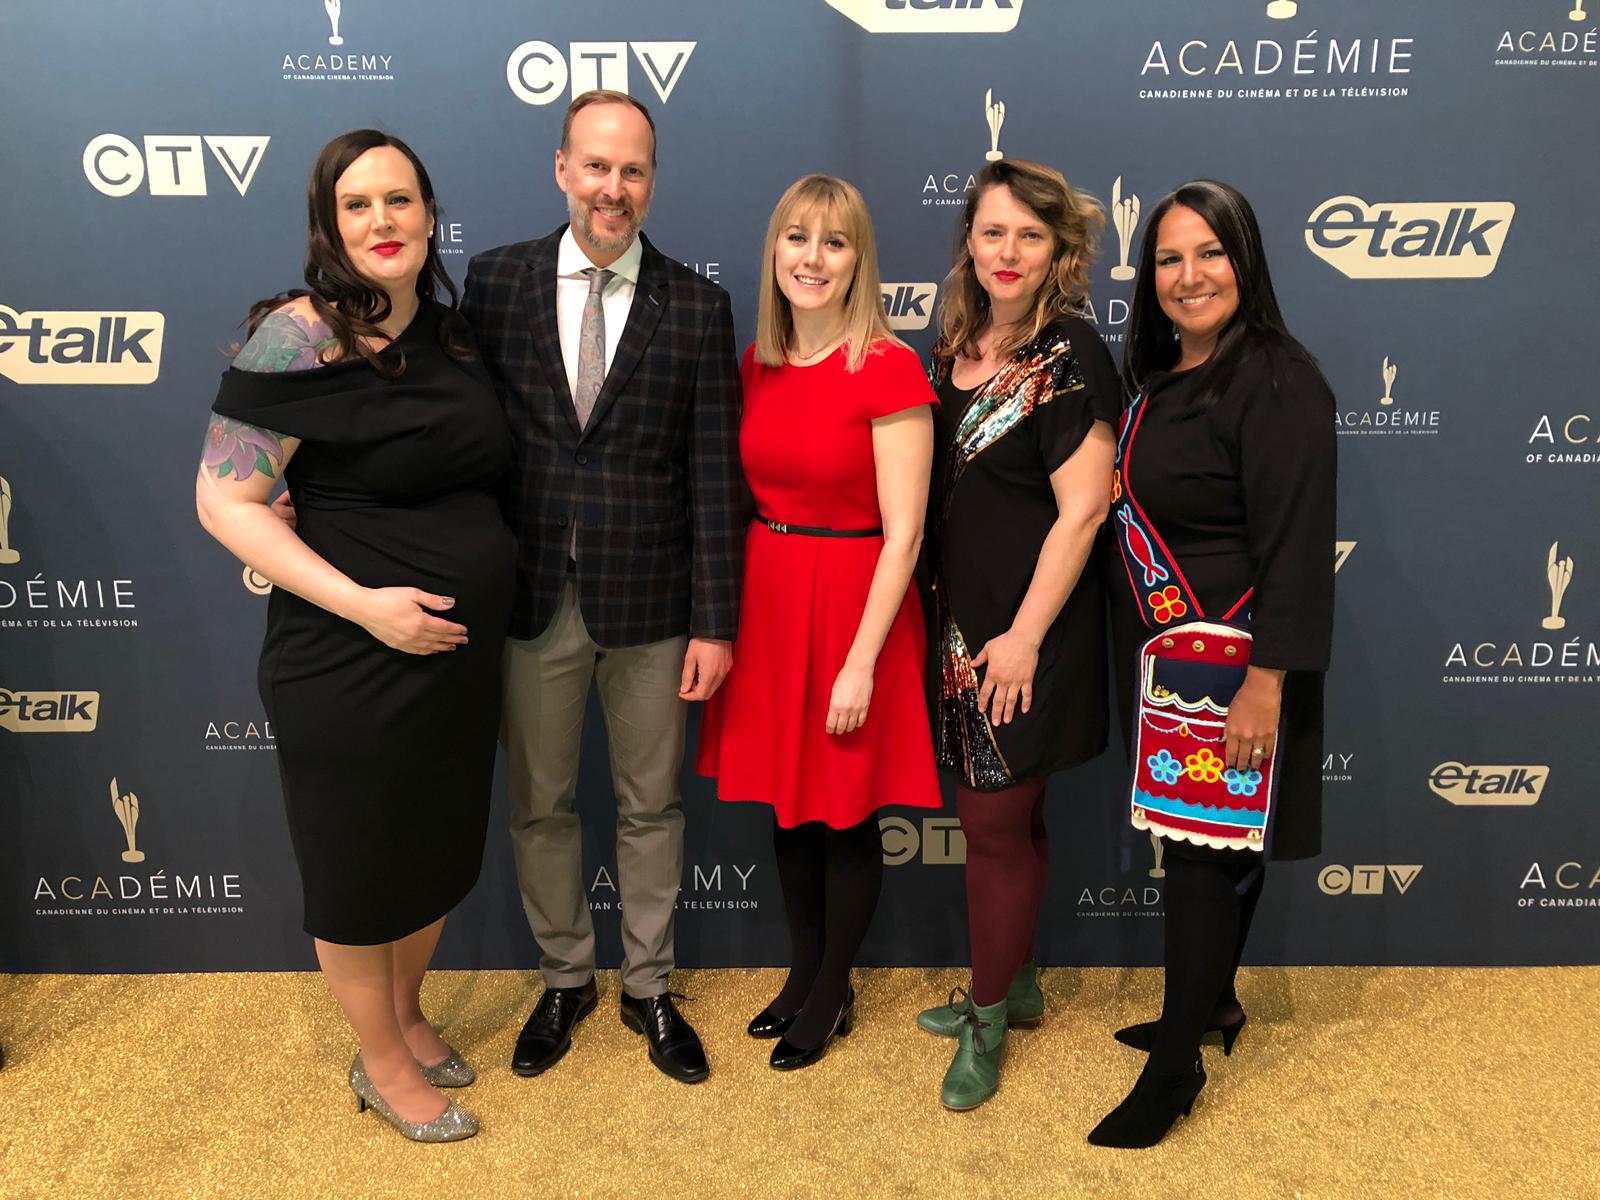 Jeff Newman is pictured with 4 woman at the Académie award show event